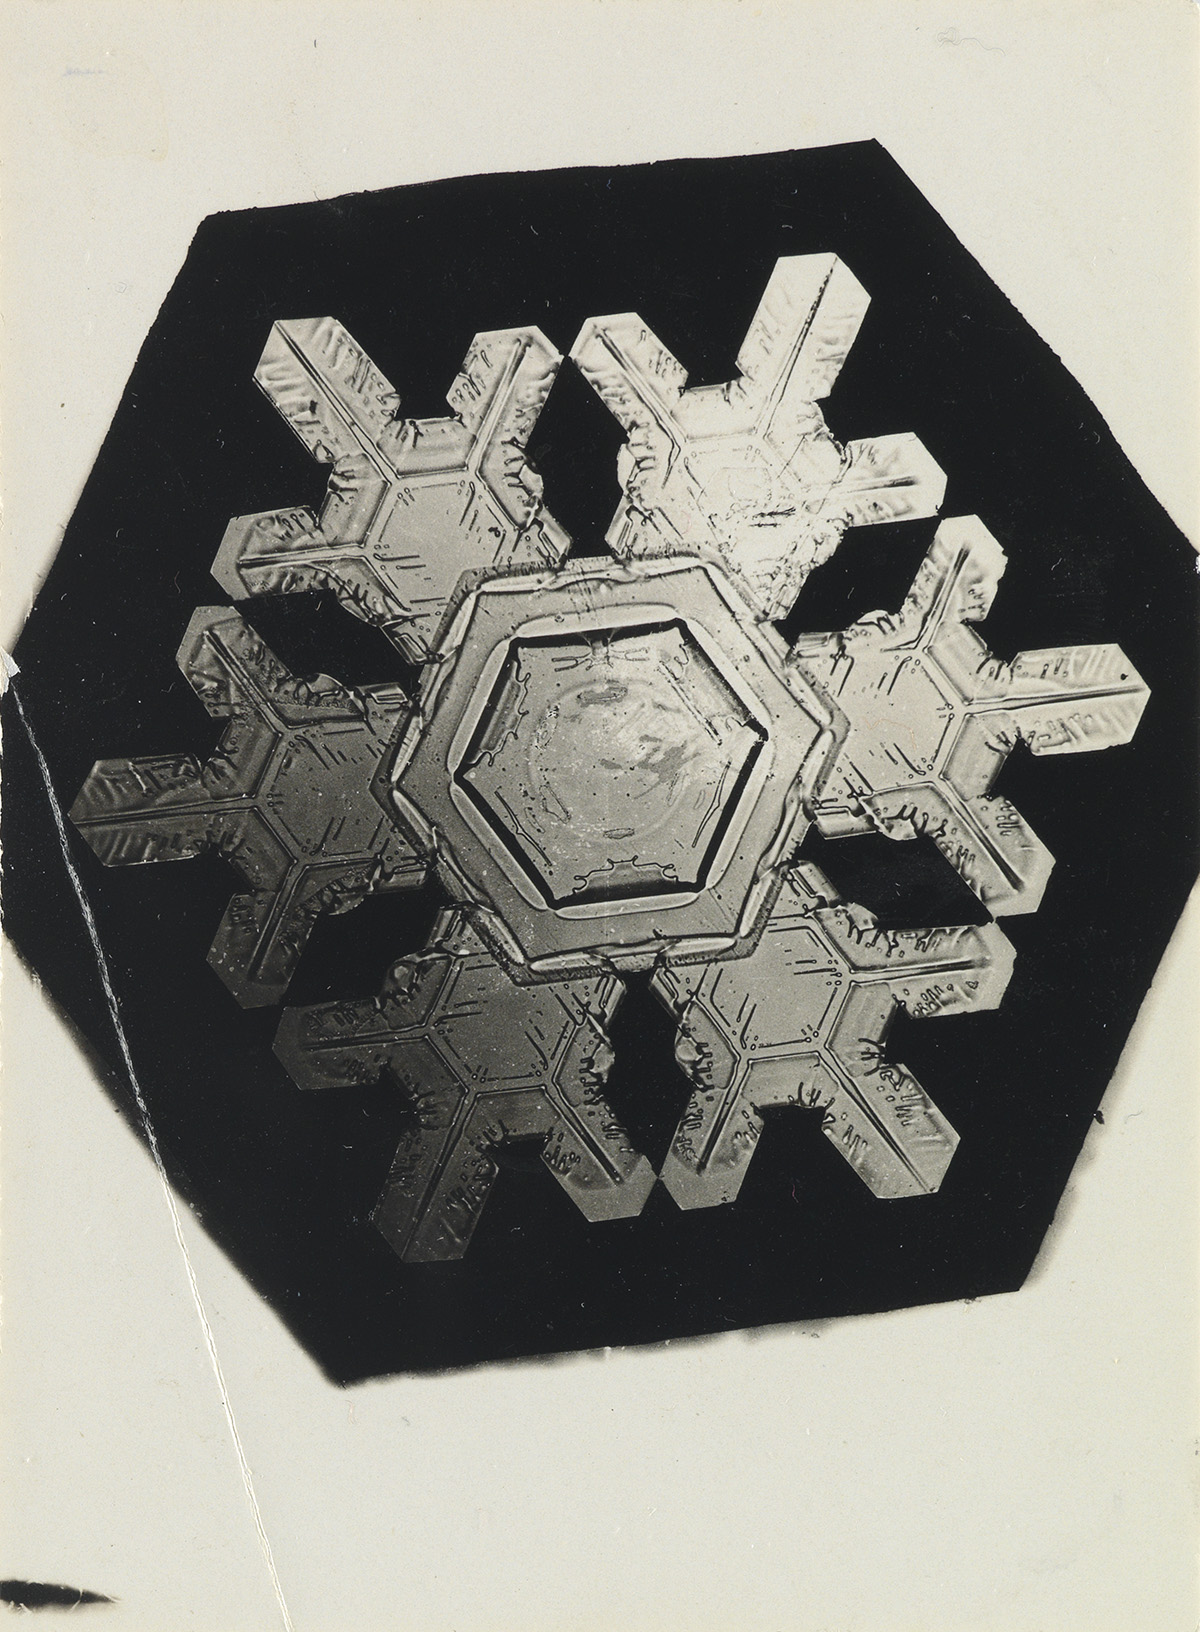 WILSON A. SNOWFLAKE BENTLEY (1865-1931) Group of 3 microphotographs depicting snowflakes.